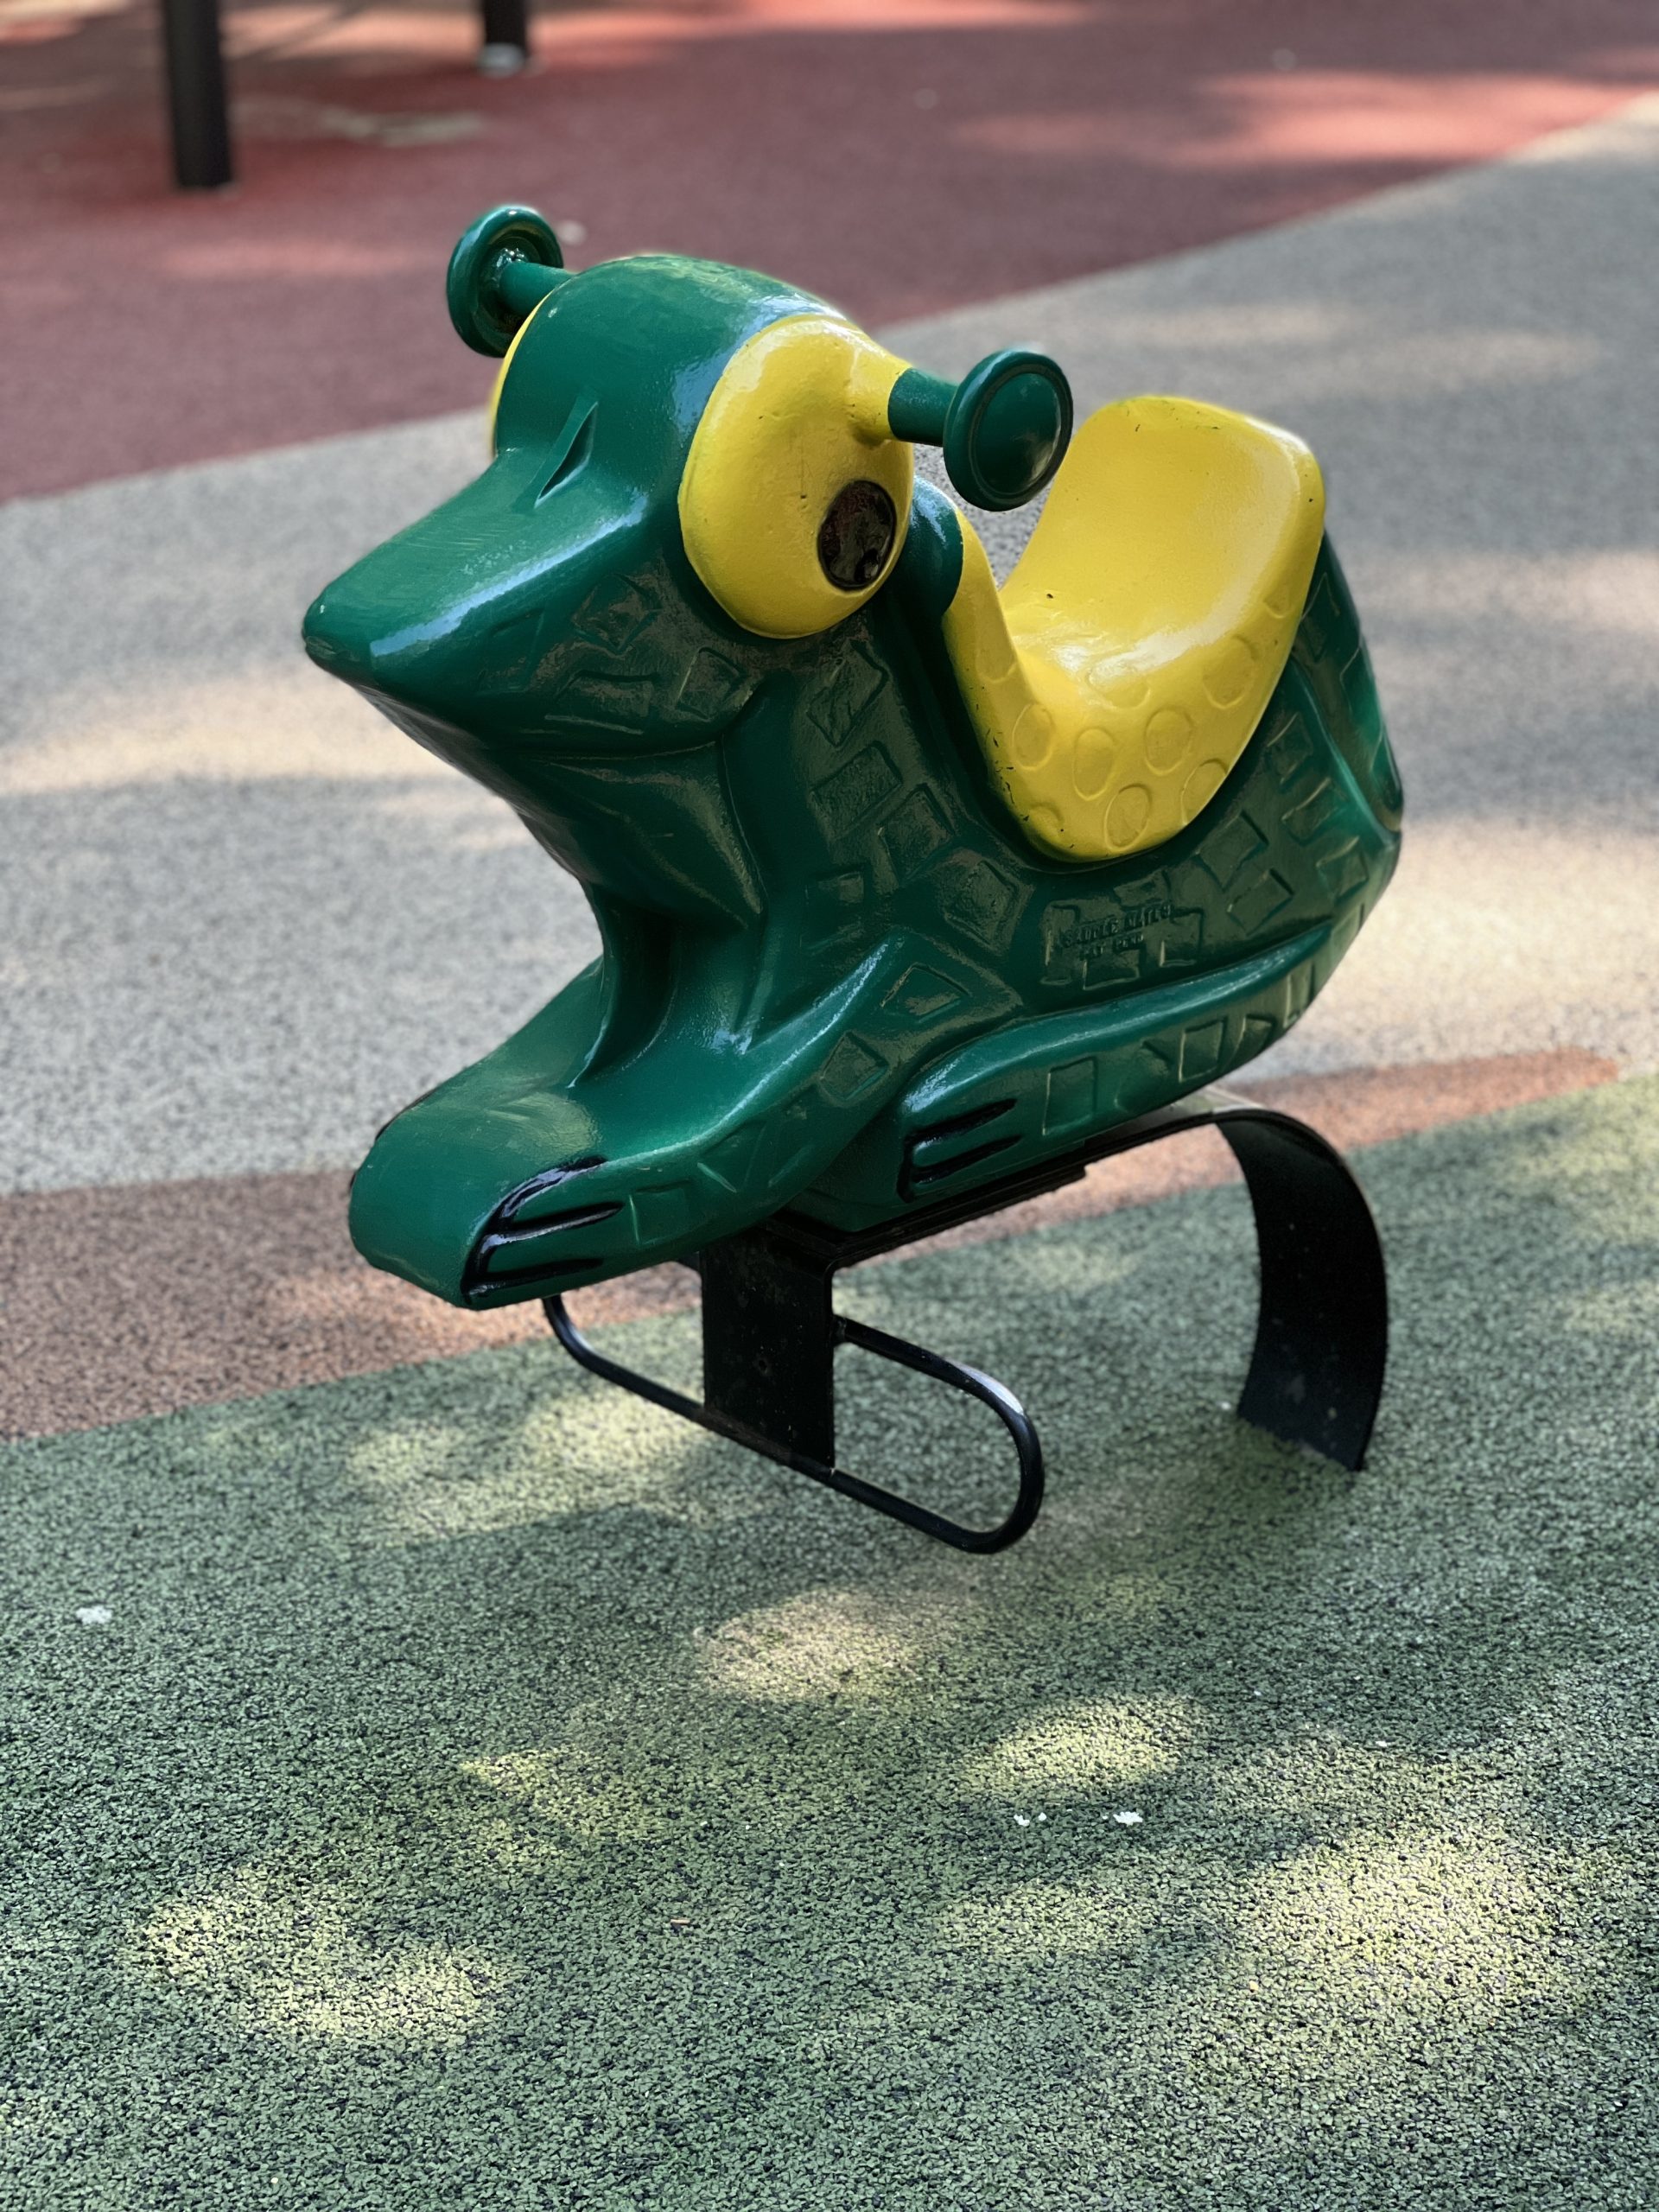 Grover Cleveland Playgrounds in Caldwell NJ - FEATURES - Ride on frog